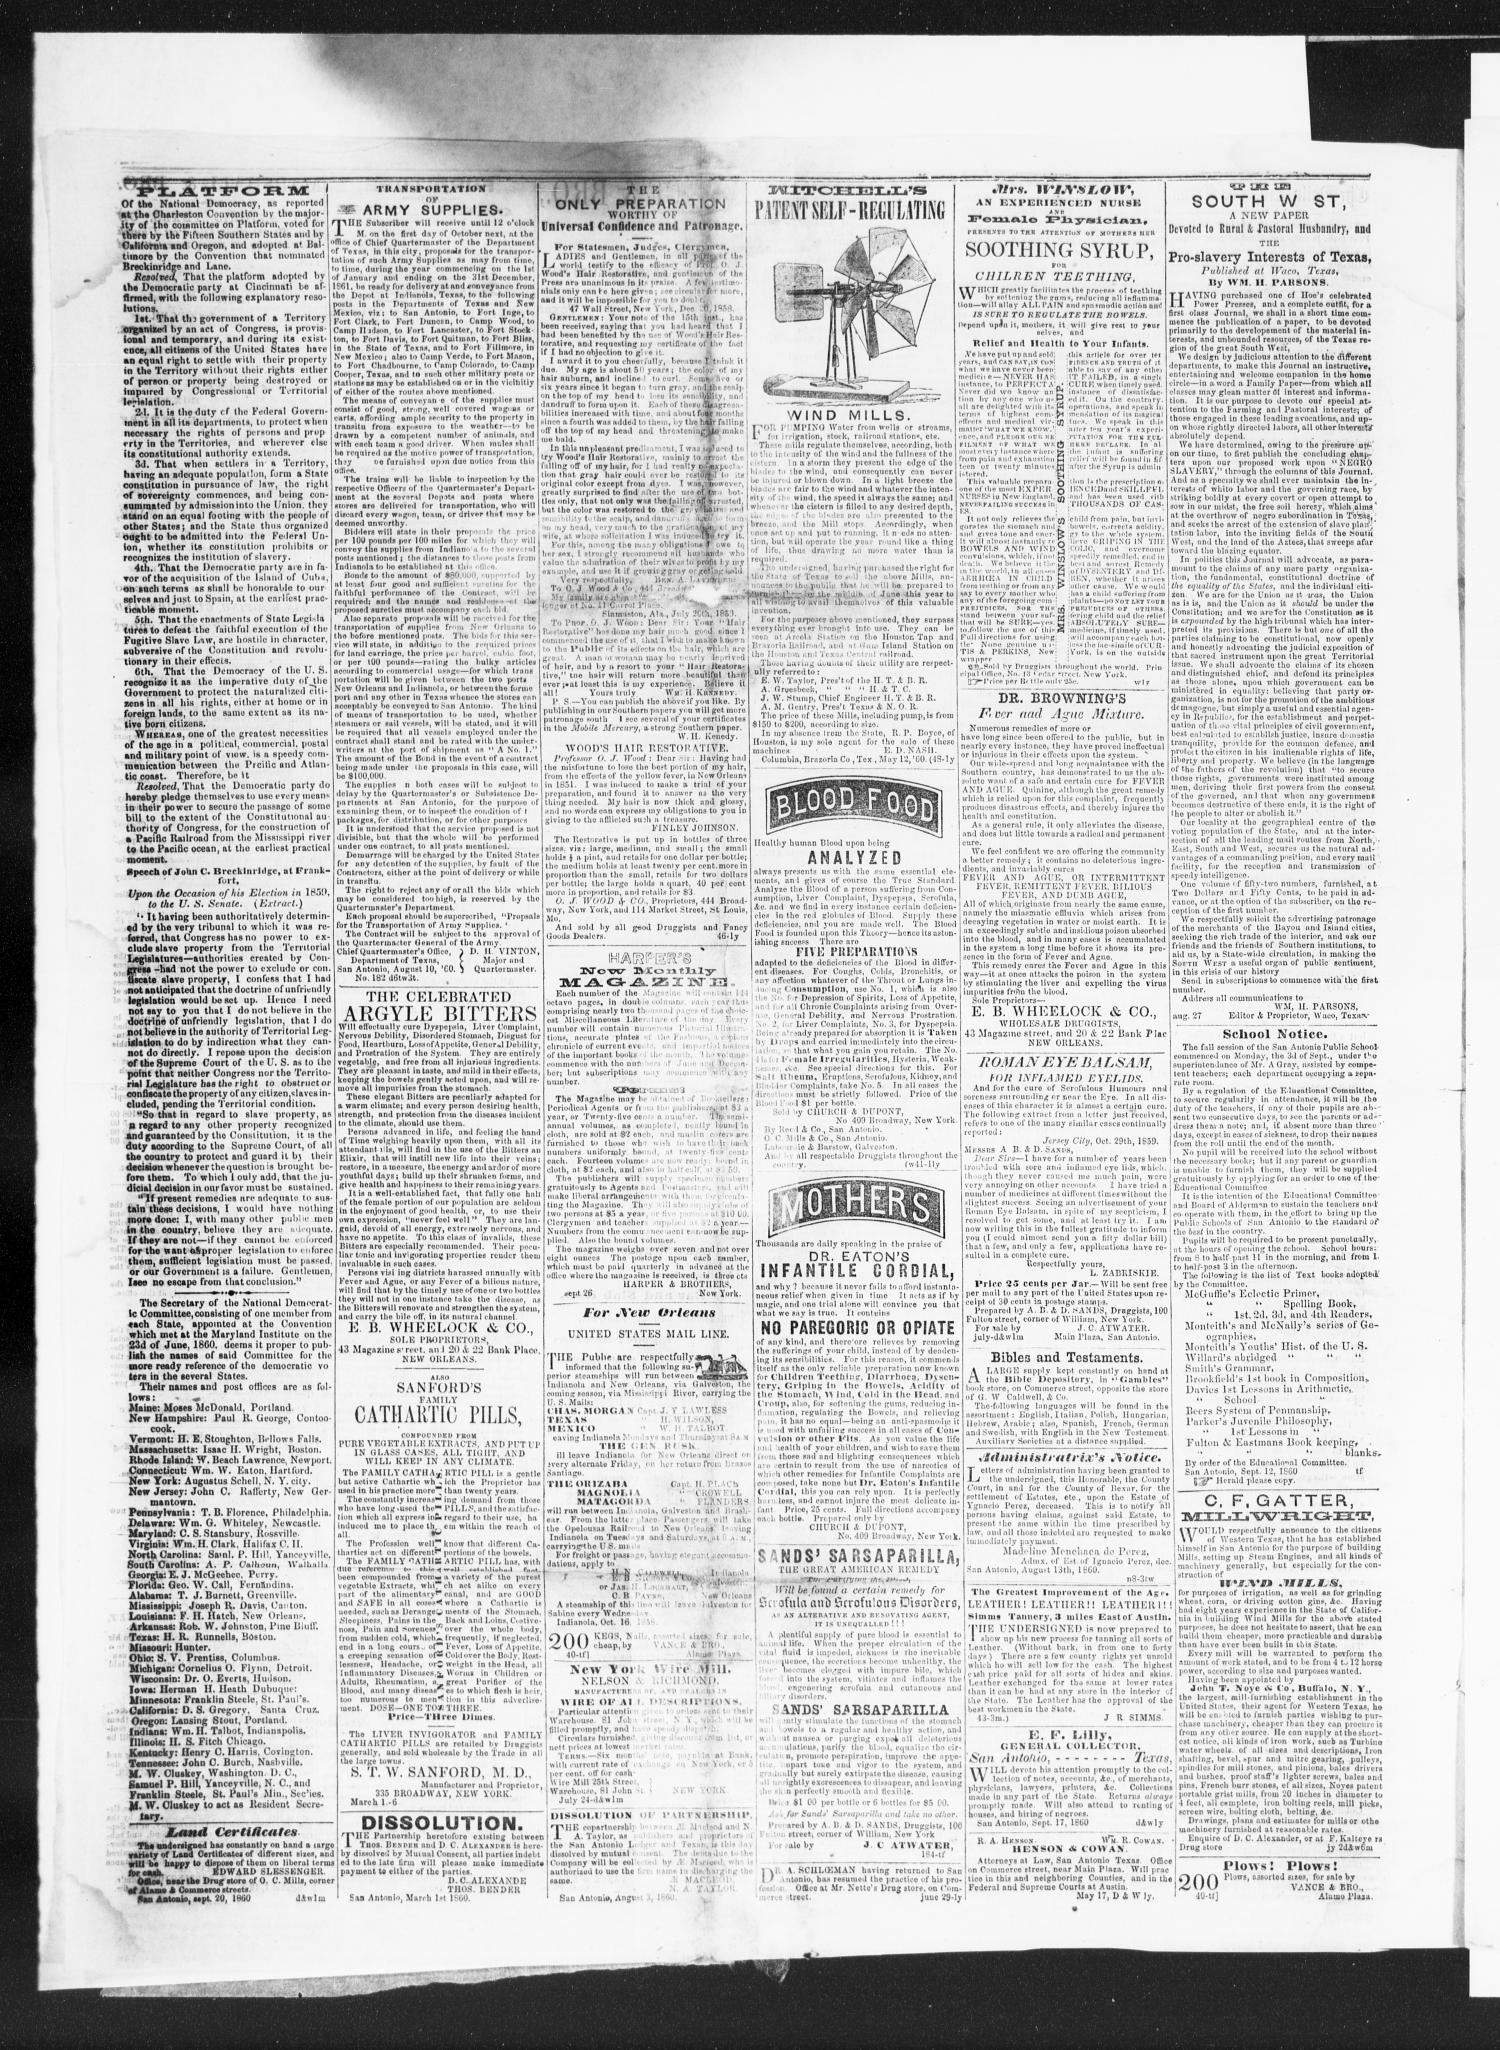 The Daily Ledger and Texan (San Antonio, Tex.), Vol. 1, No. 312, Ed. 1, Monday, October 8, 1860
                                                
                                                    [Sequence #]: 4 of 4
                                                